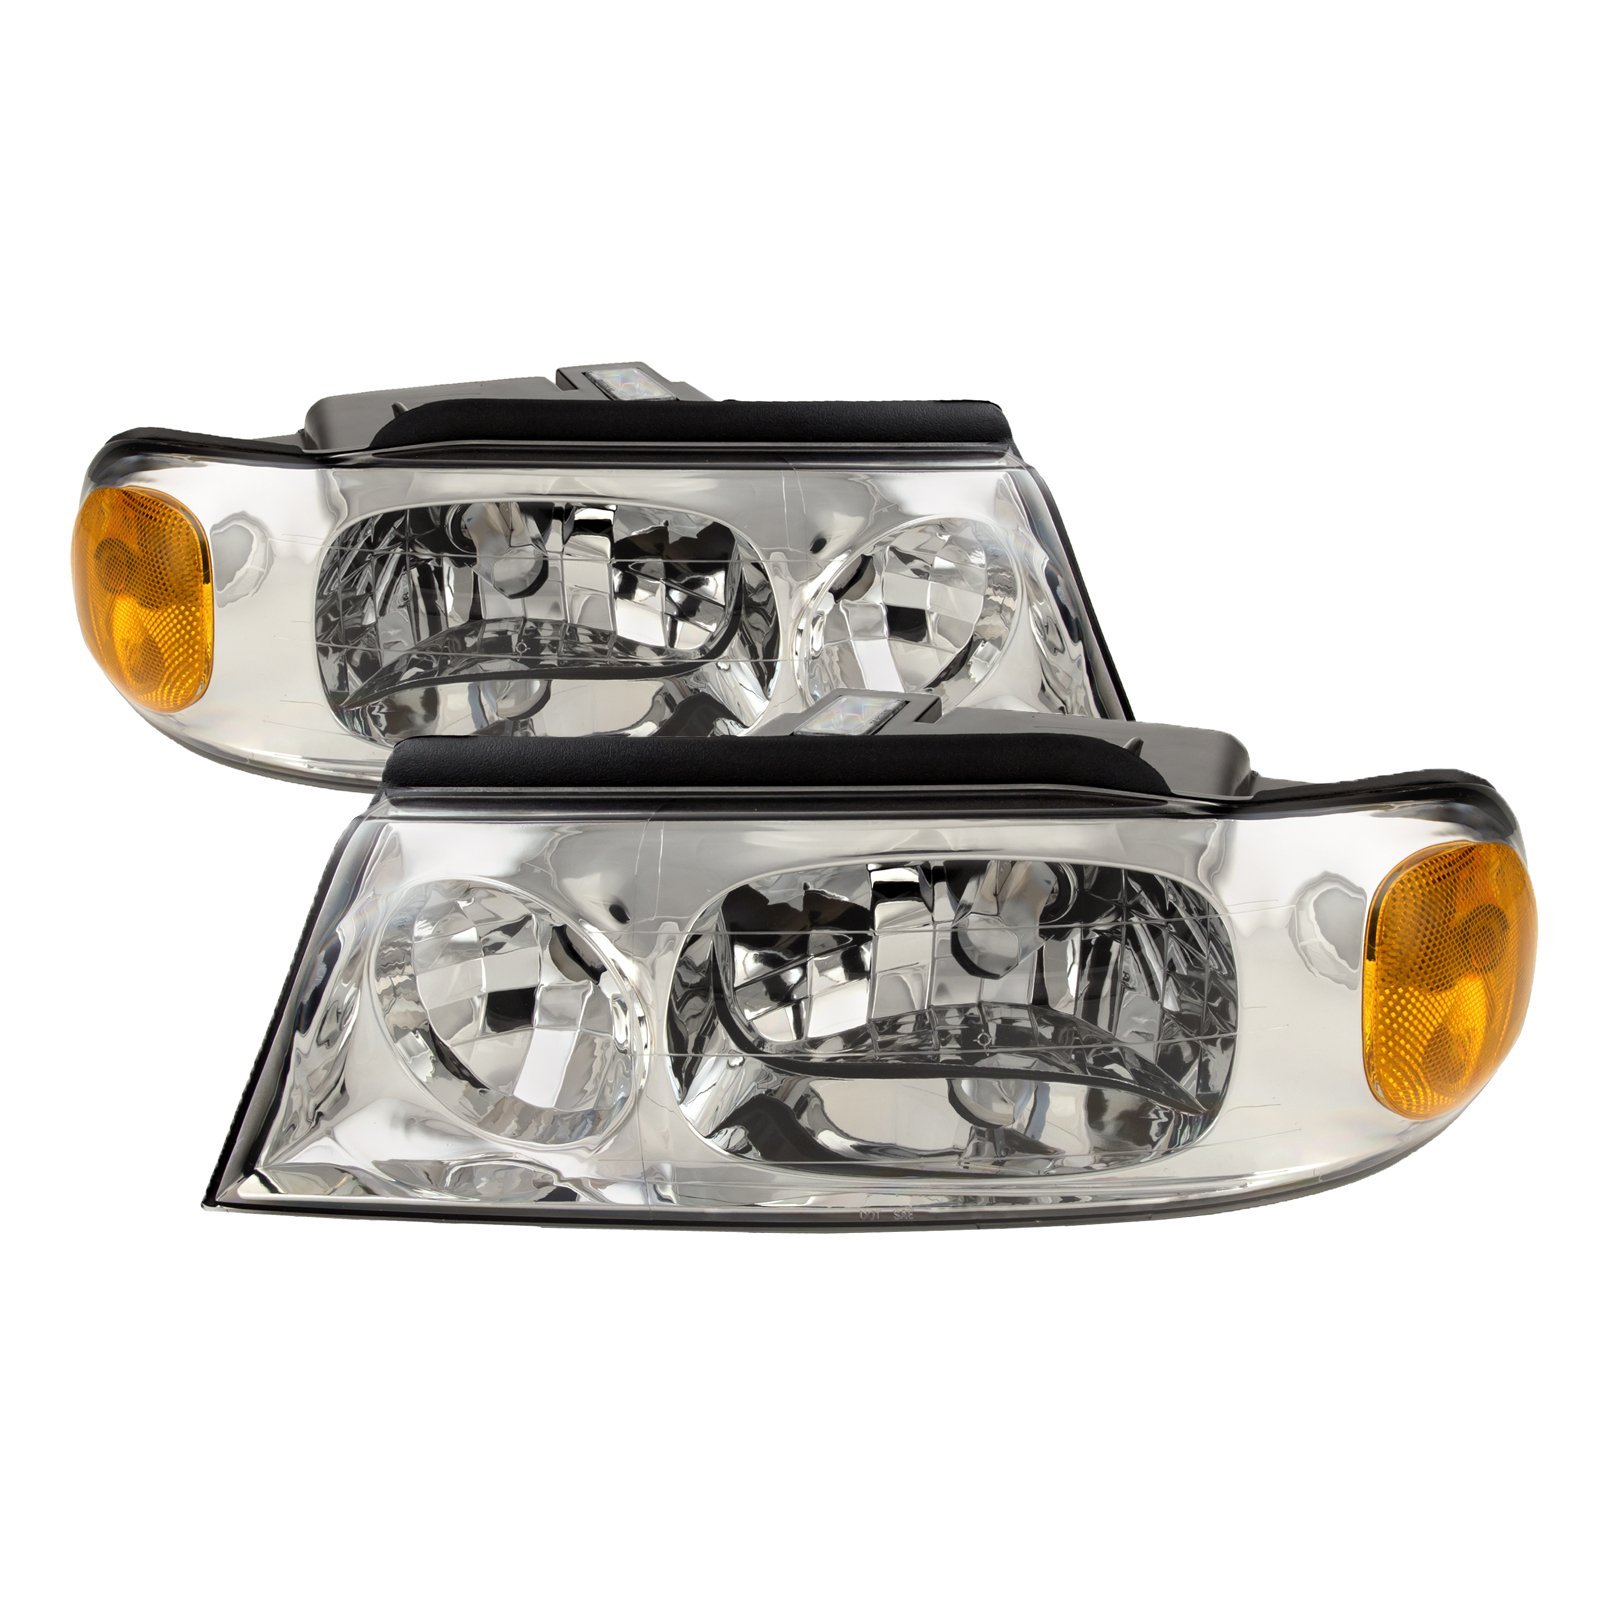 Left & Right Chrome Headlights New RVLightings Country Coach Magna 2005-2010 RV Motorhome Pair 